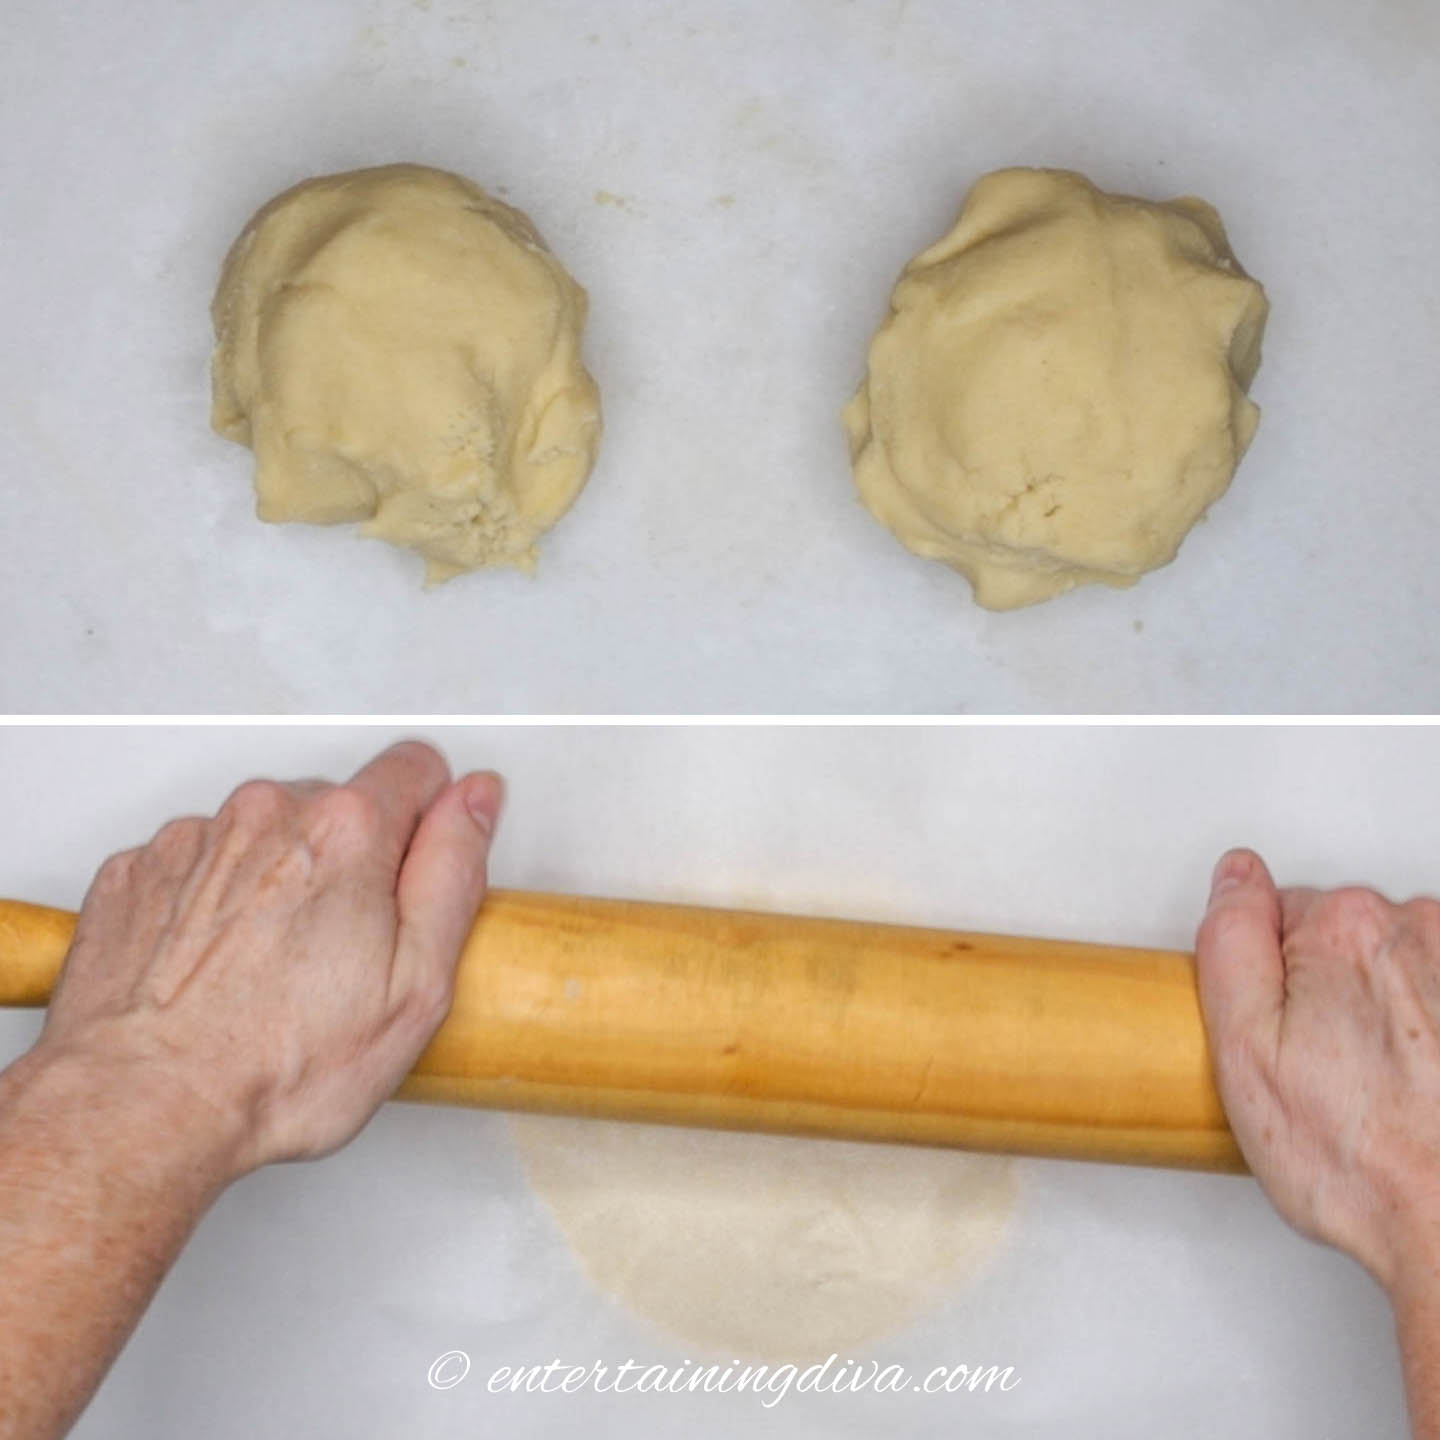 Dough divided into balls and being rolled with a rolling pin